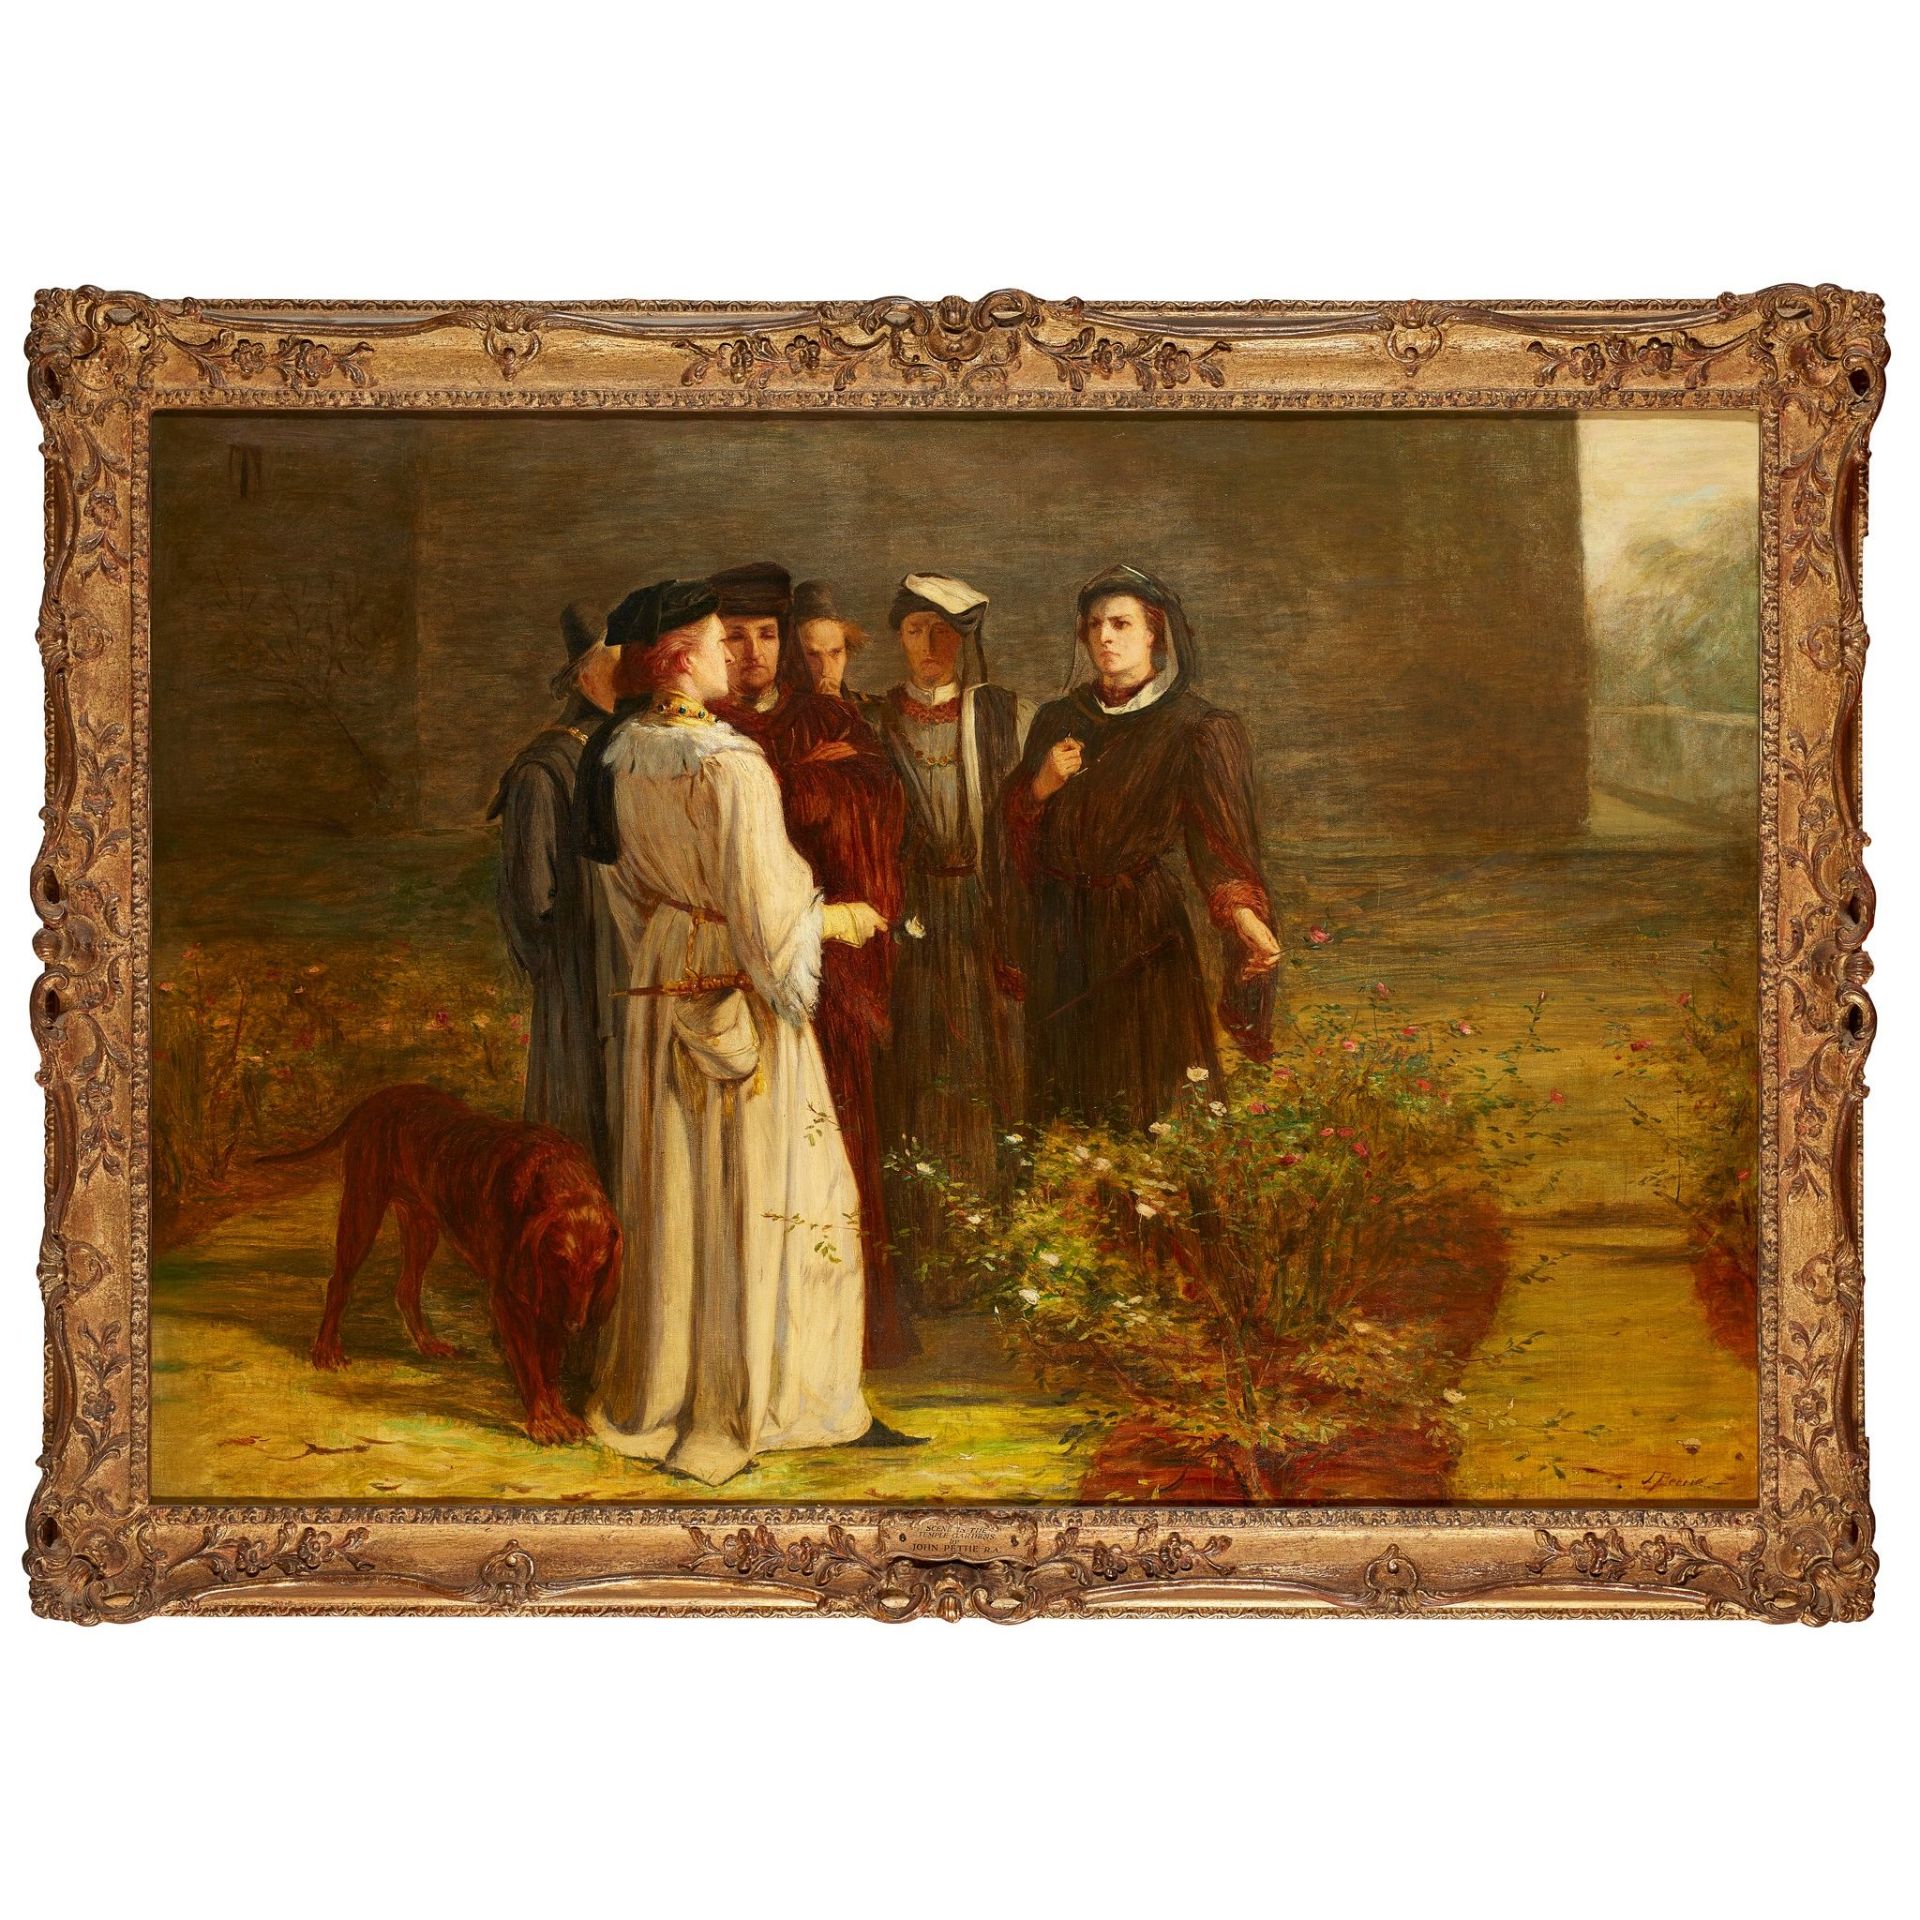 JOHN PETTIE R.A., H.R.S.A. (SCOTTISH 1839-1893) CHOOSING THE ROSES IN THE TEMPLE GARDENS - Image 2 of 3